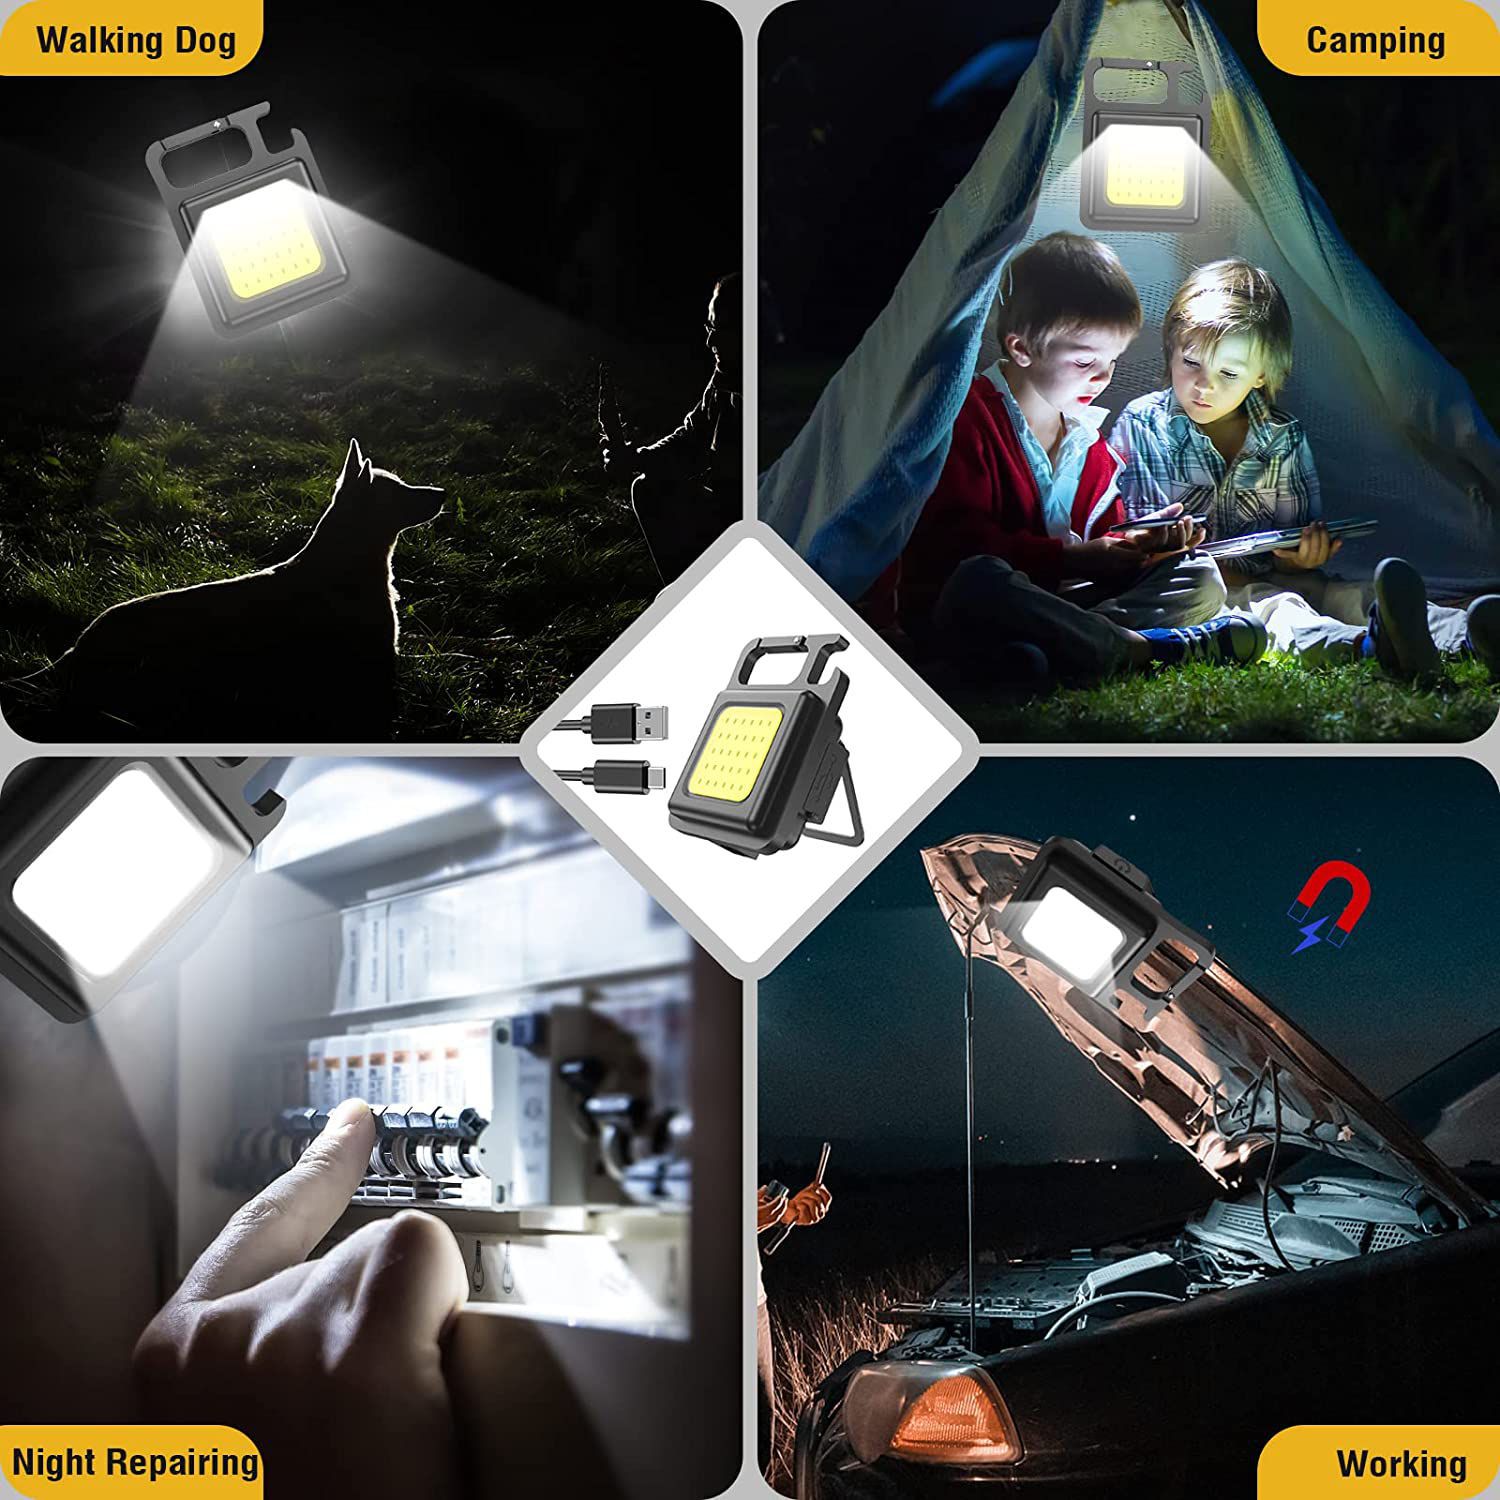     			Bright Mini Keychain Light (Pack of 2), Small Led Flashlight USB Rechargeable, 4 Modes, 800 Lumens, Portable Pocket Lights with Folding Bracket Bottle Opener and Magnet